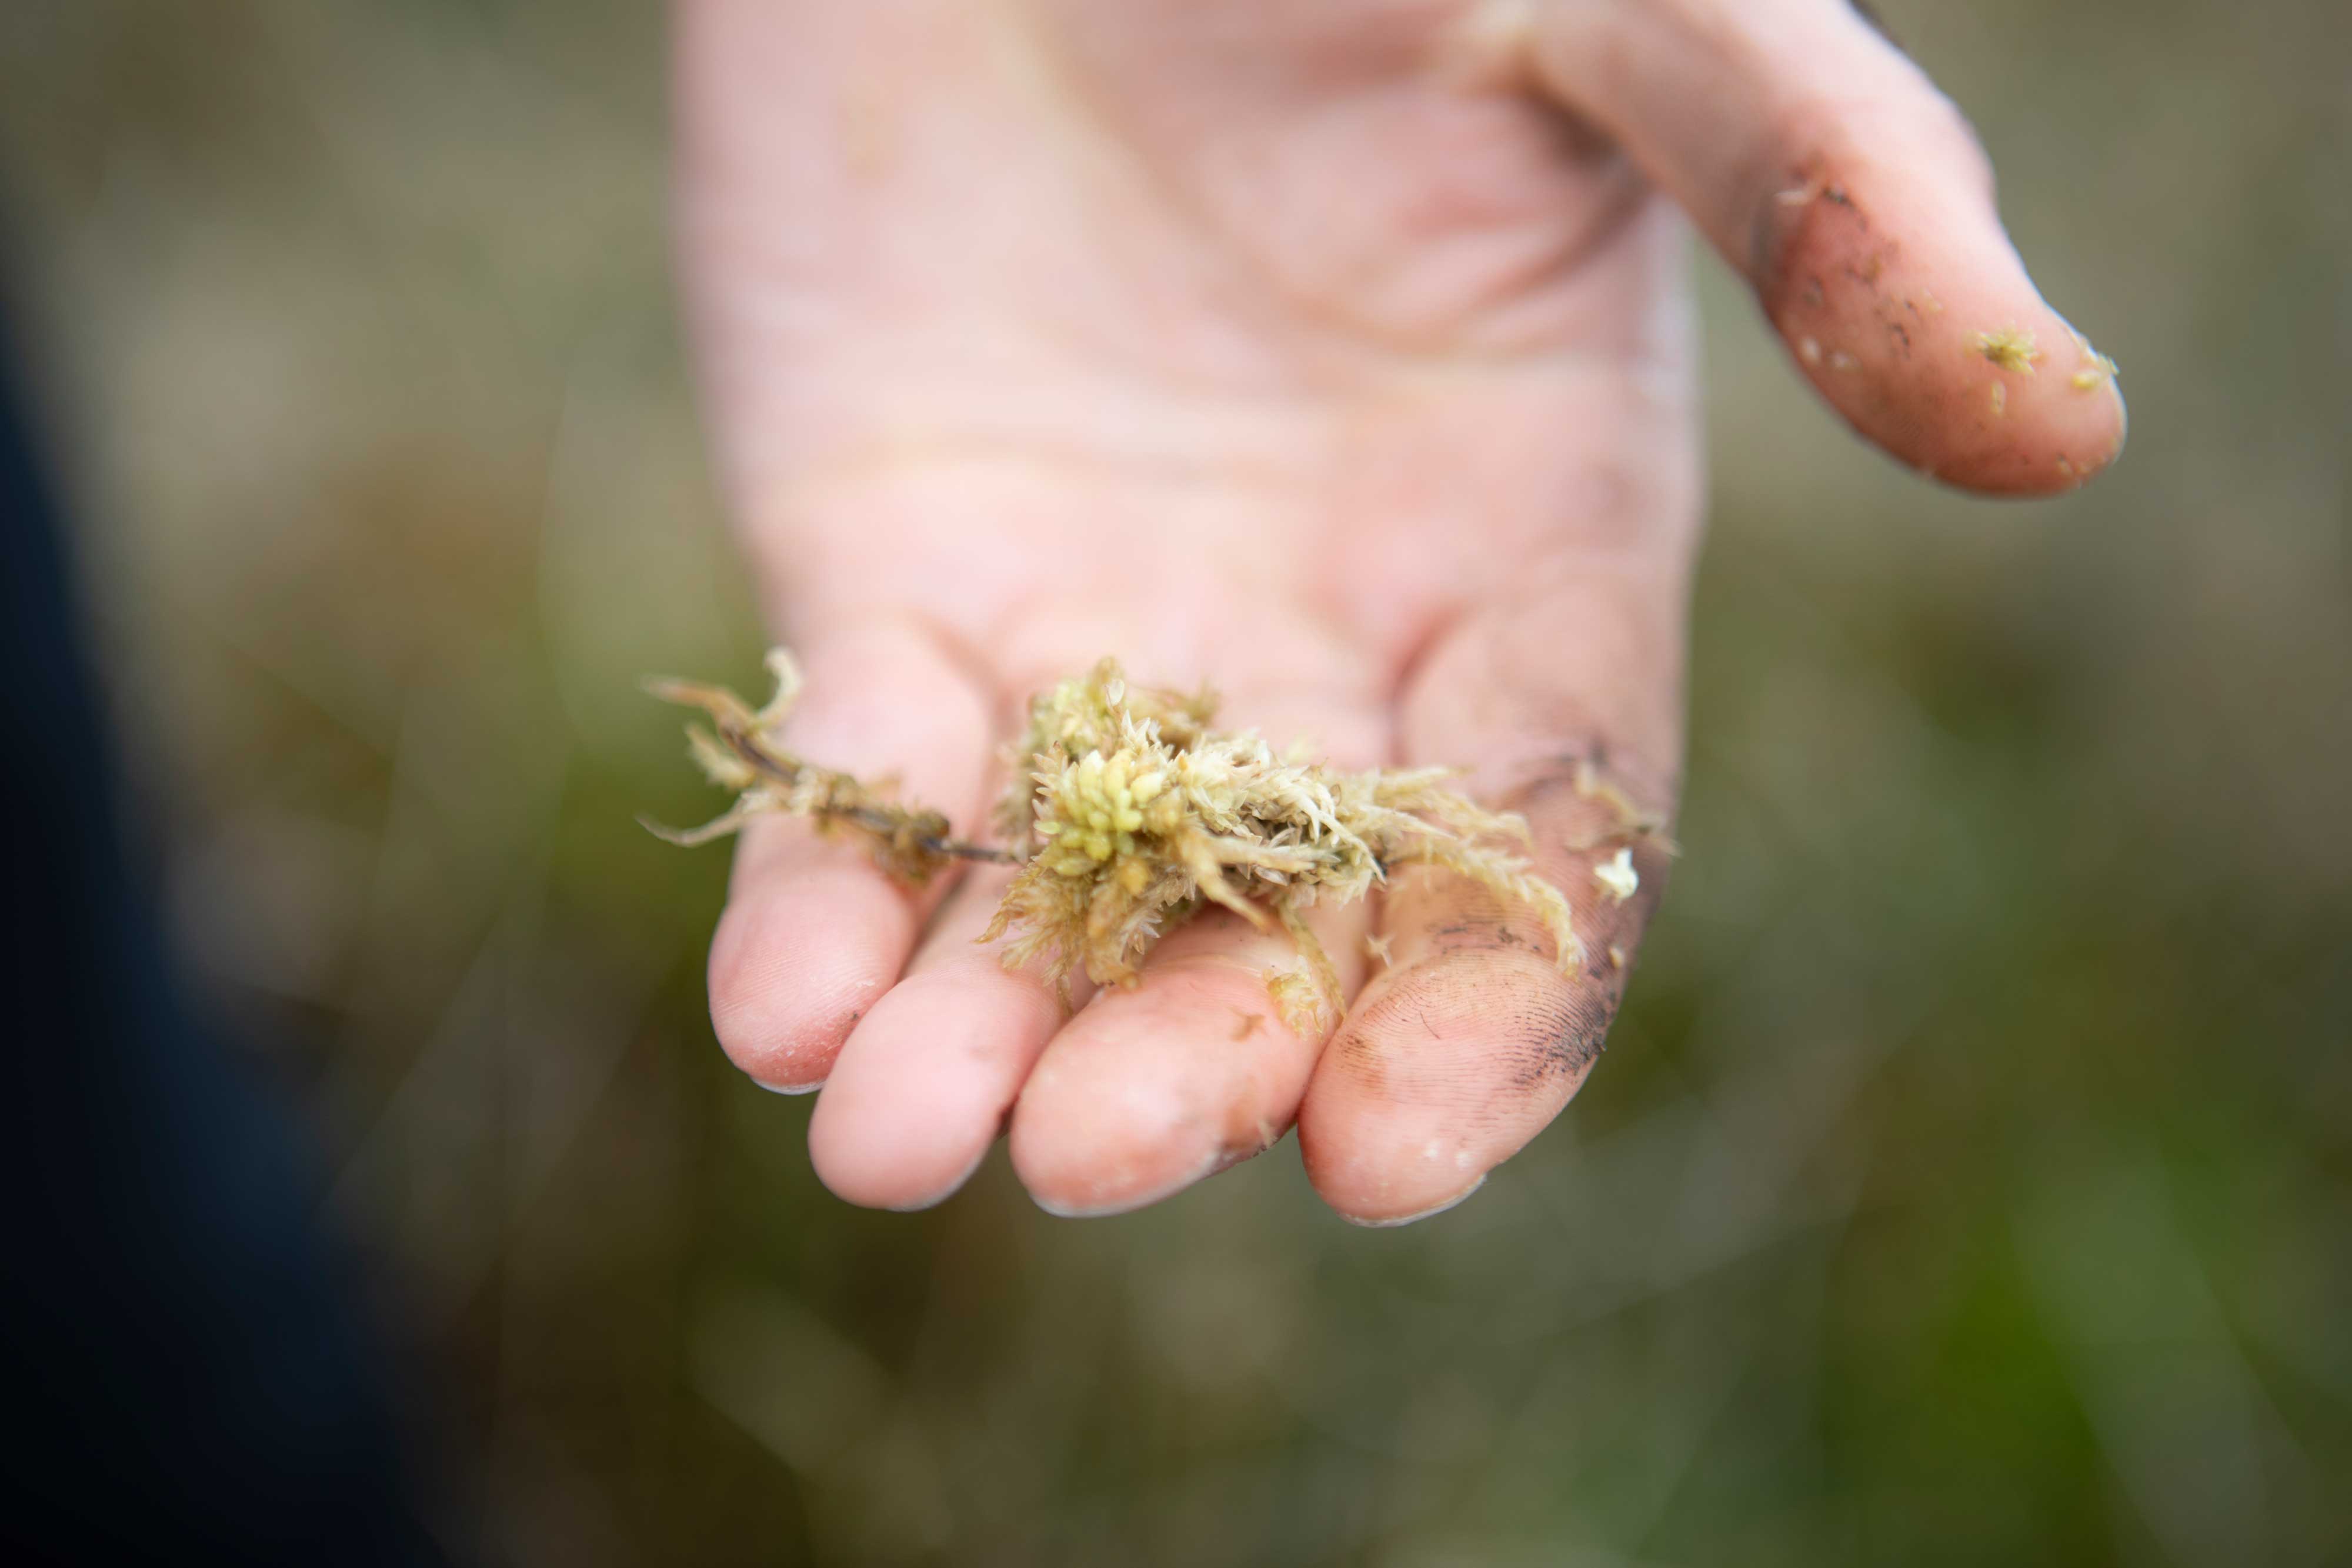 Close up photo of sphagnum moss in the palm of a hand. Credit Charlie Fox